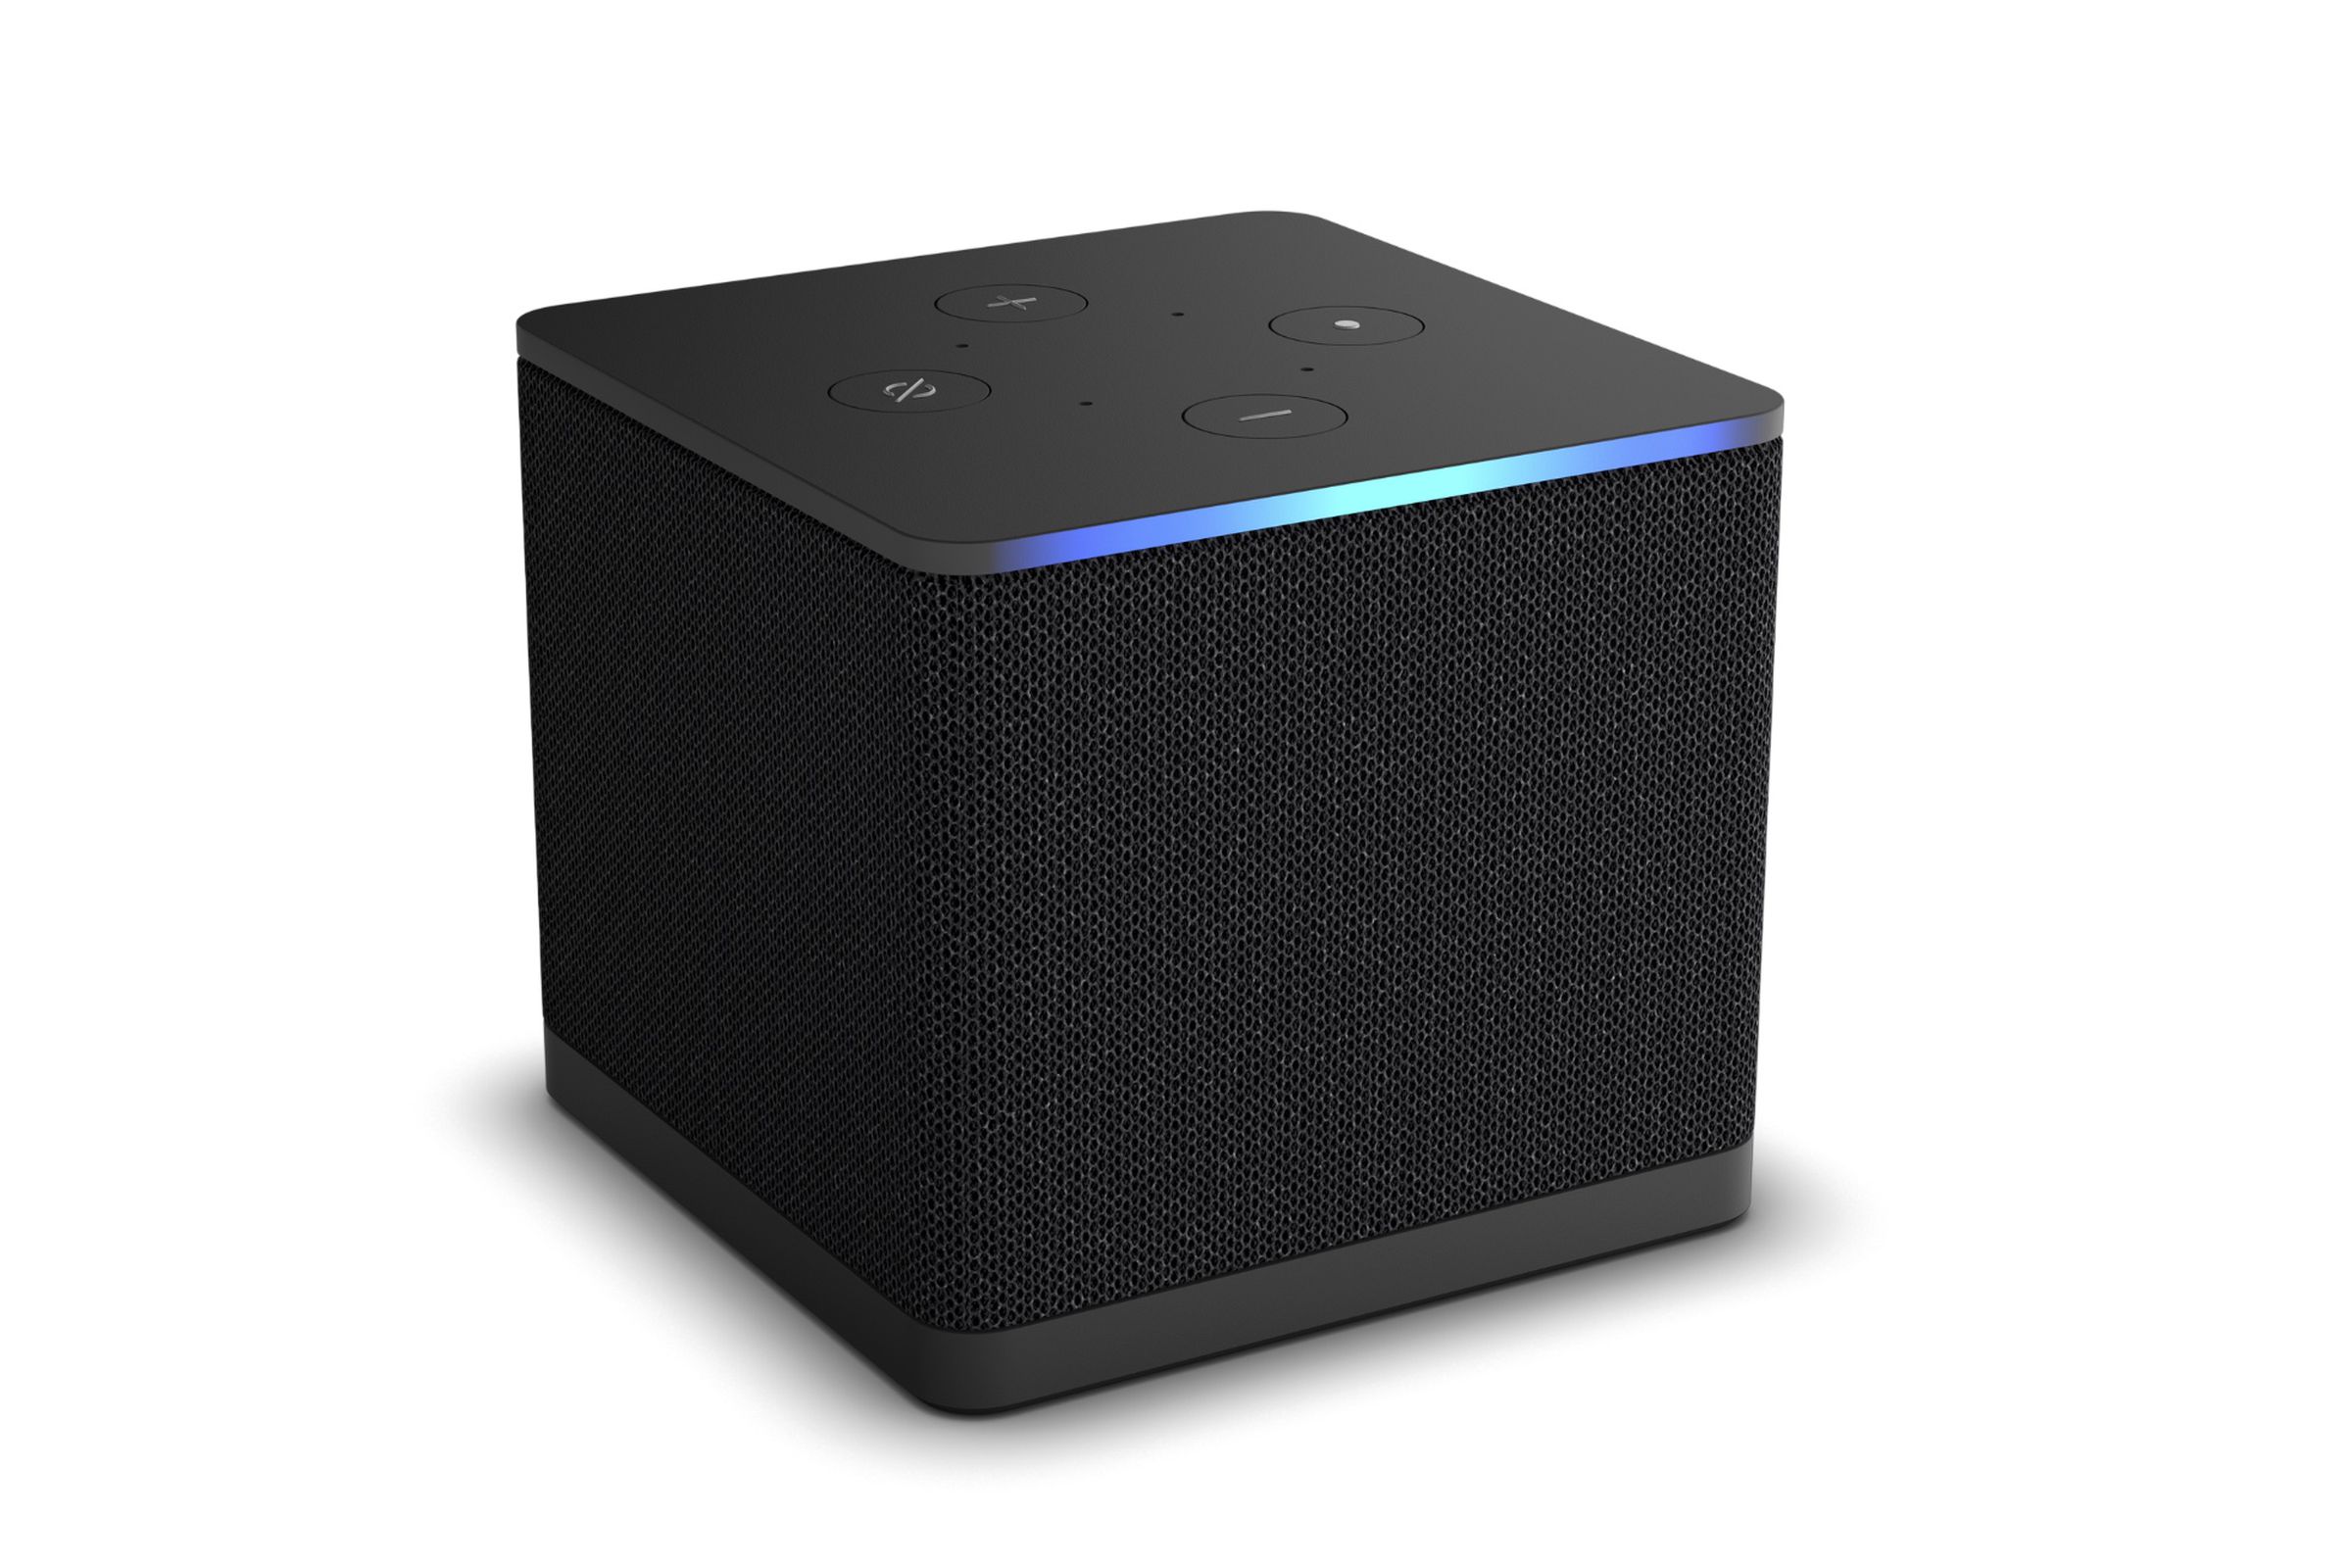 A marketing render of the Amazon Fire TV Cube (2022) as seen from an angle slightly above and to the left.